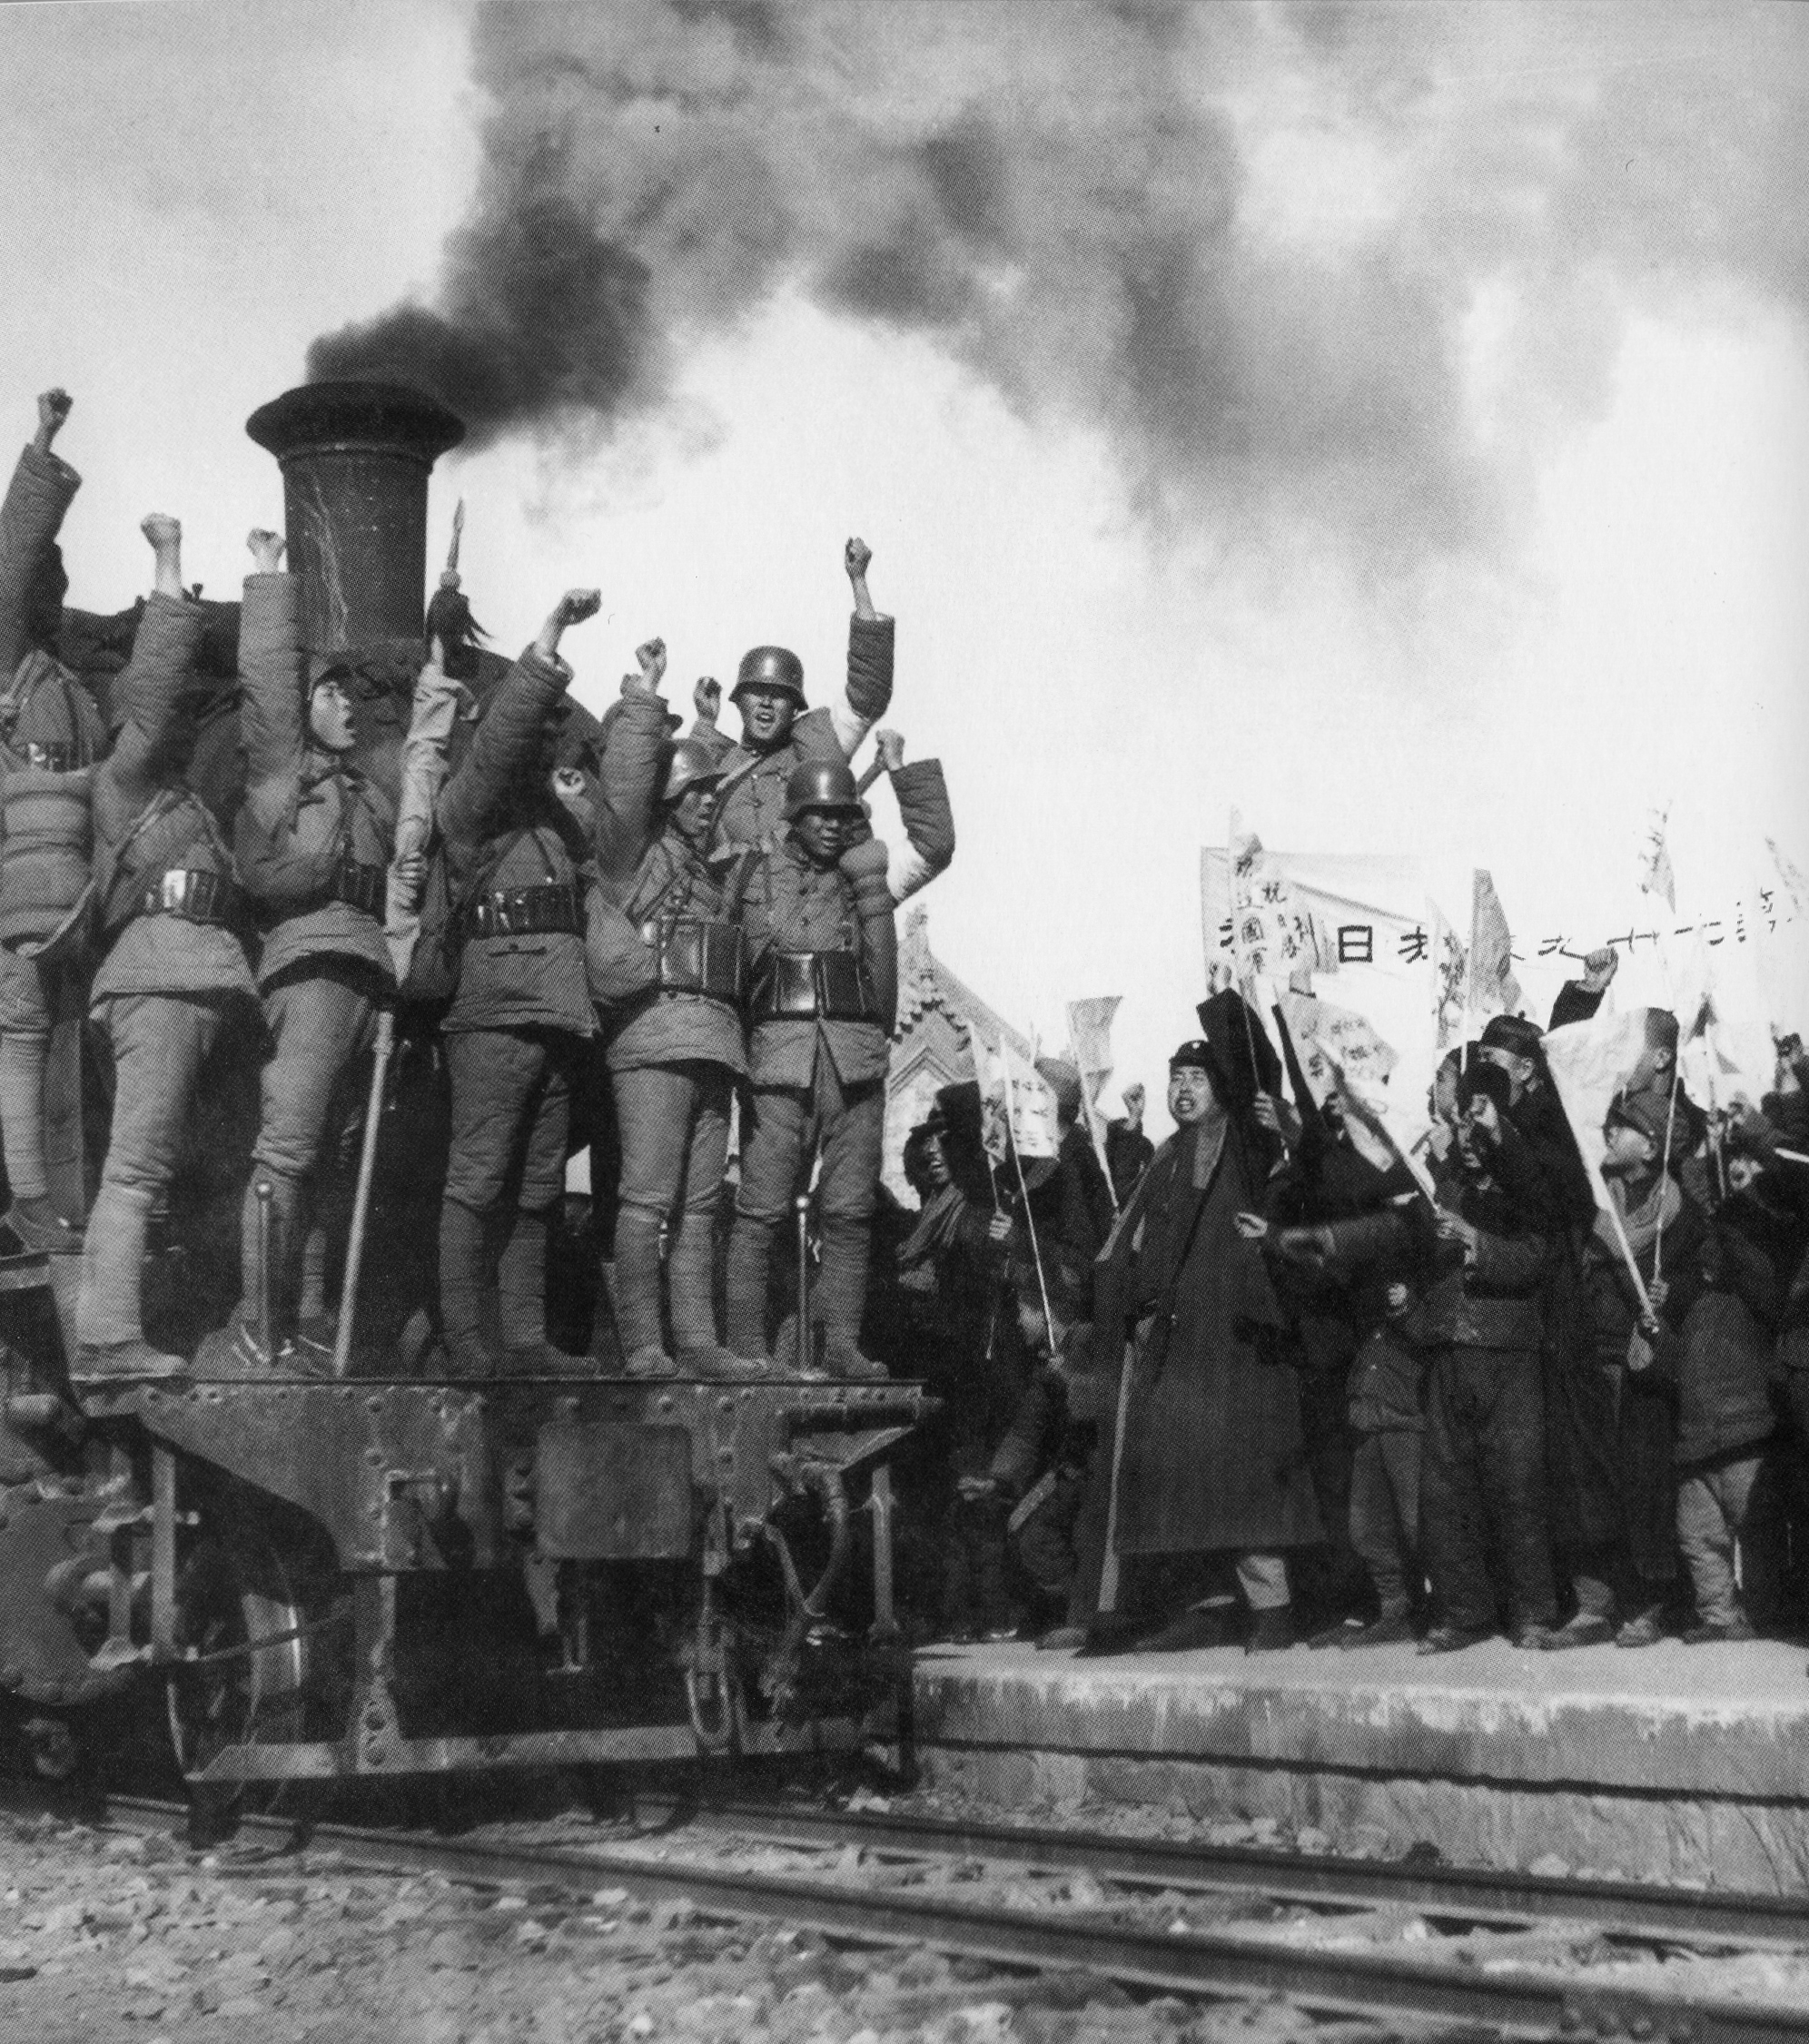 Troops of Chinese 179th Brigade departing Taiyuan, Shanxi Province, China for the front lines, Oct 1937